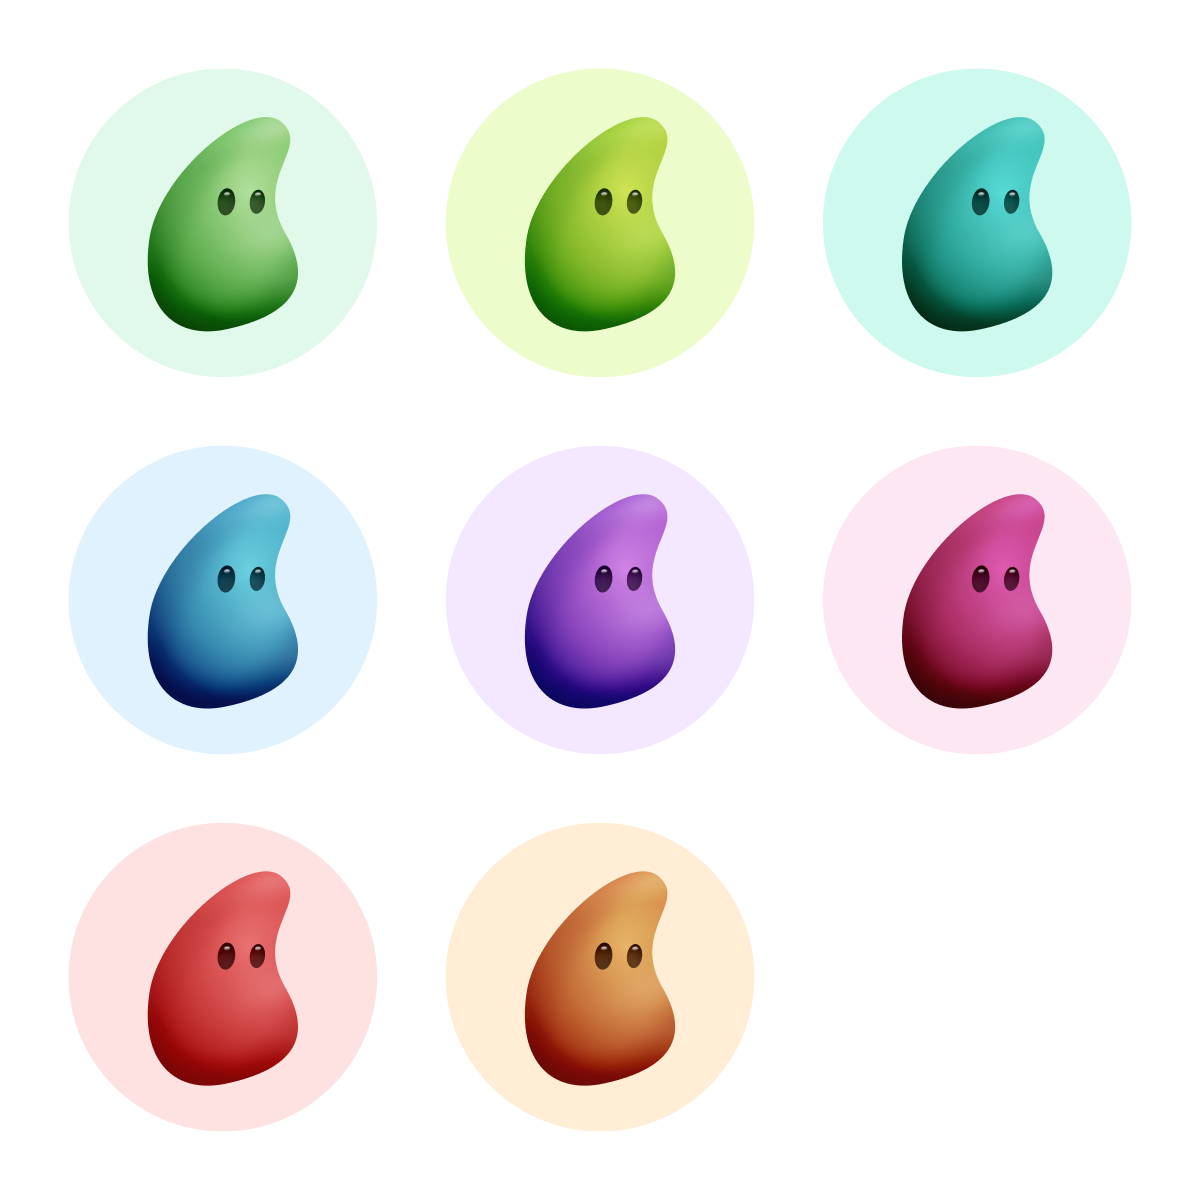 8 colorful circles with a jelly bean character in each representing the color of the circle.